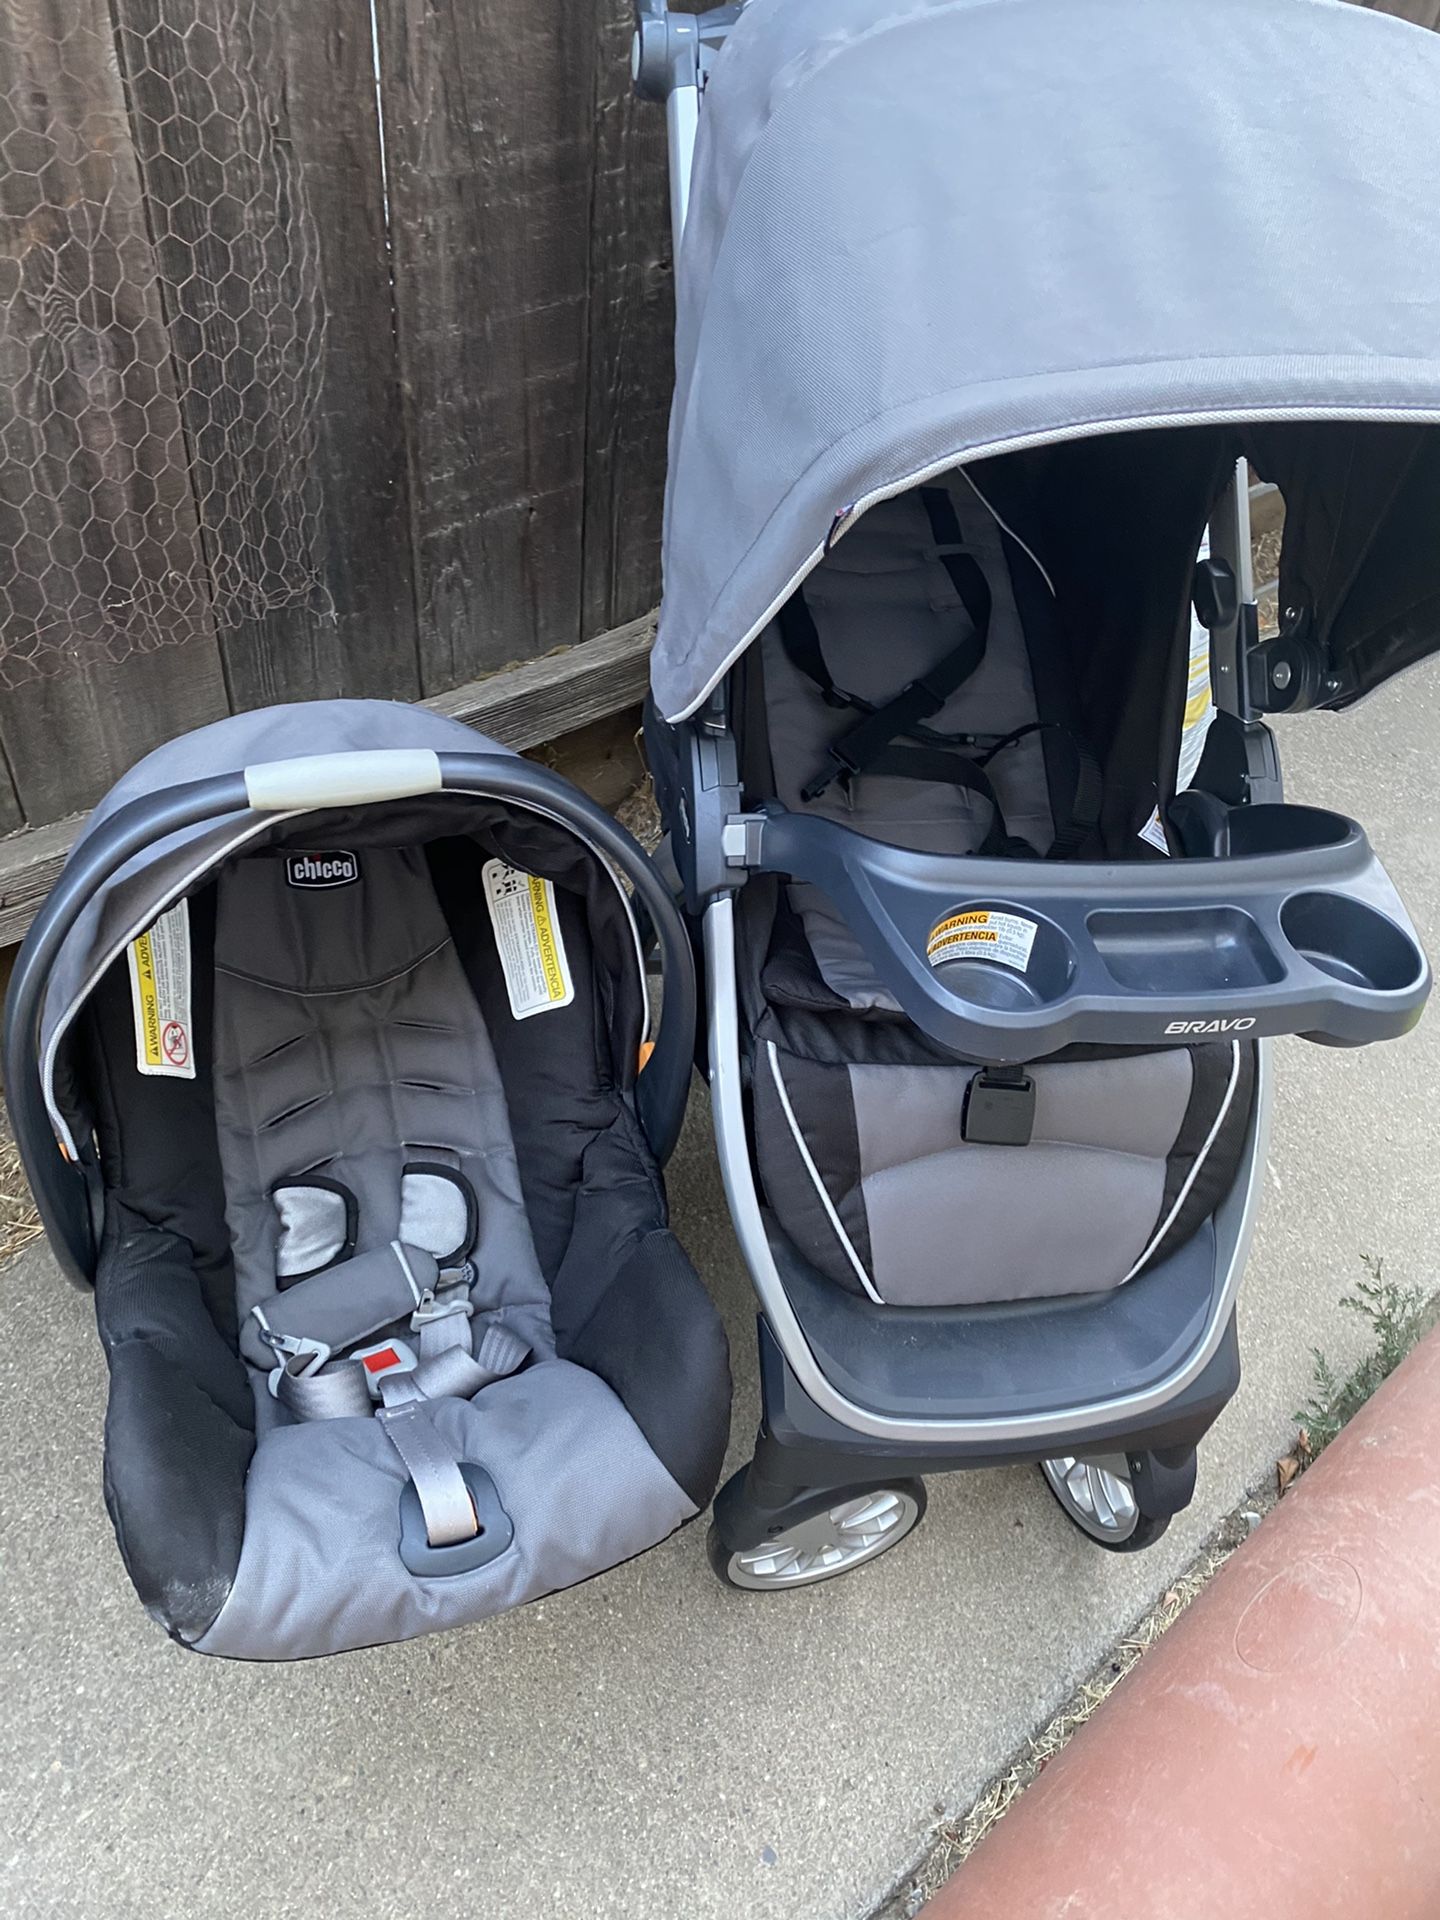 Chicco infant car seat and stroller